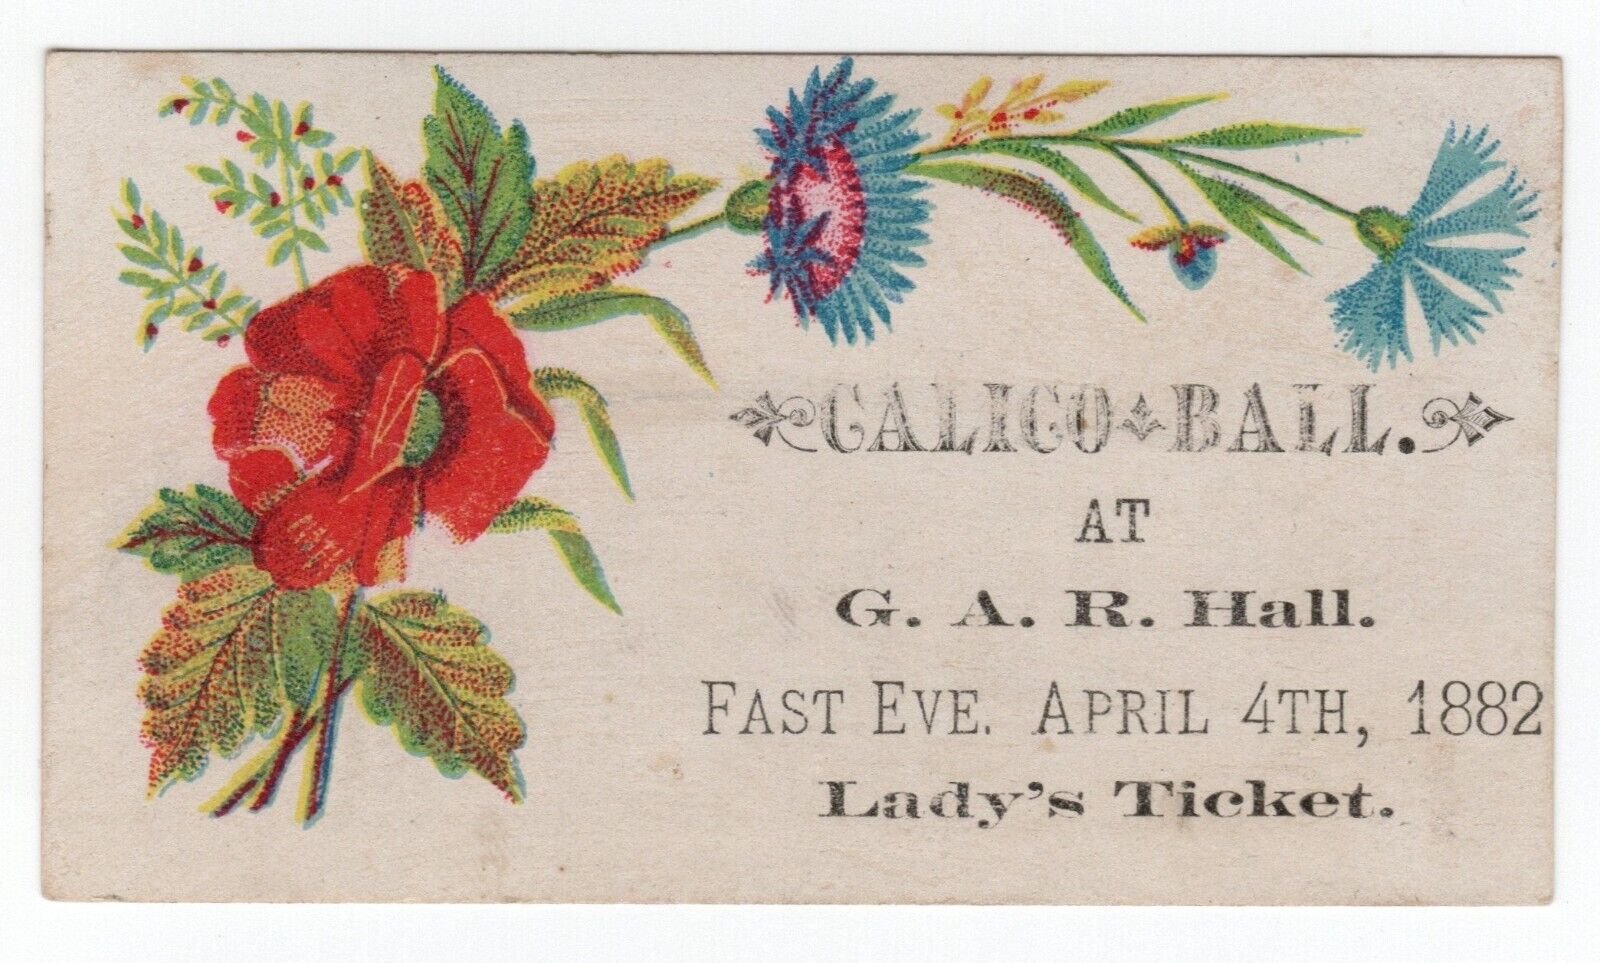 1882 Calico Ball At G.A.R Hall Ladys Ticket Victorian Trade Card Flowers